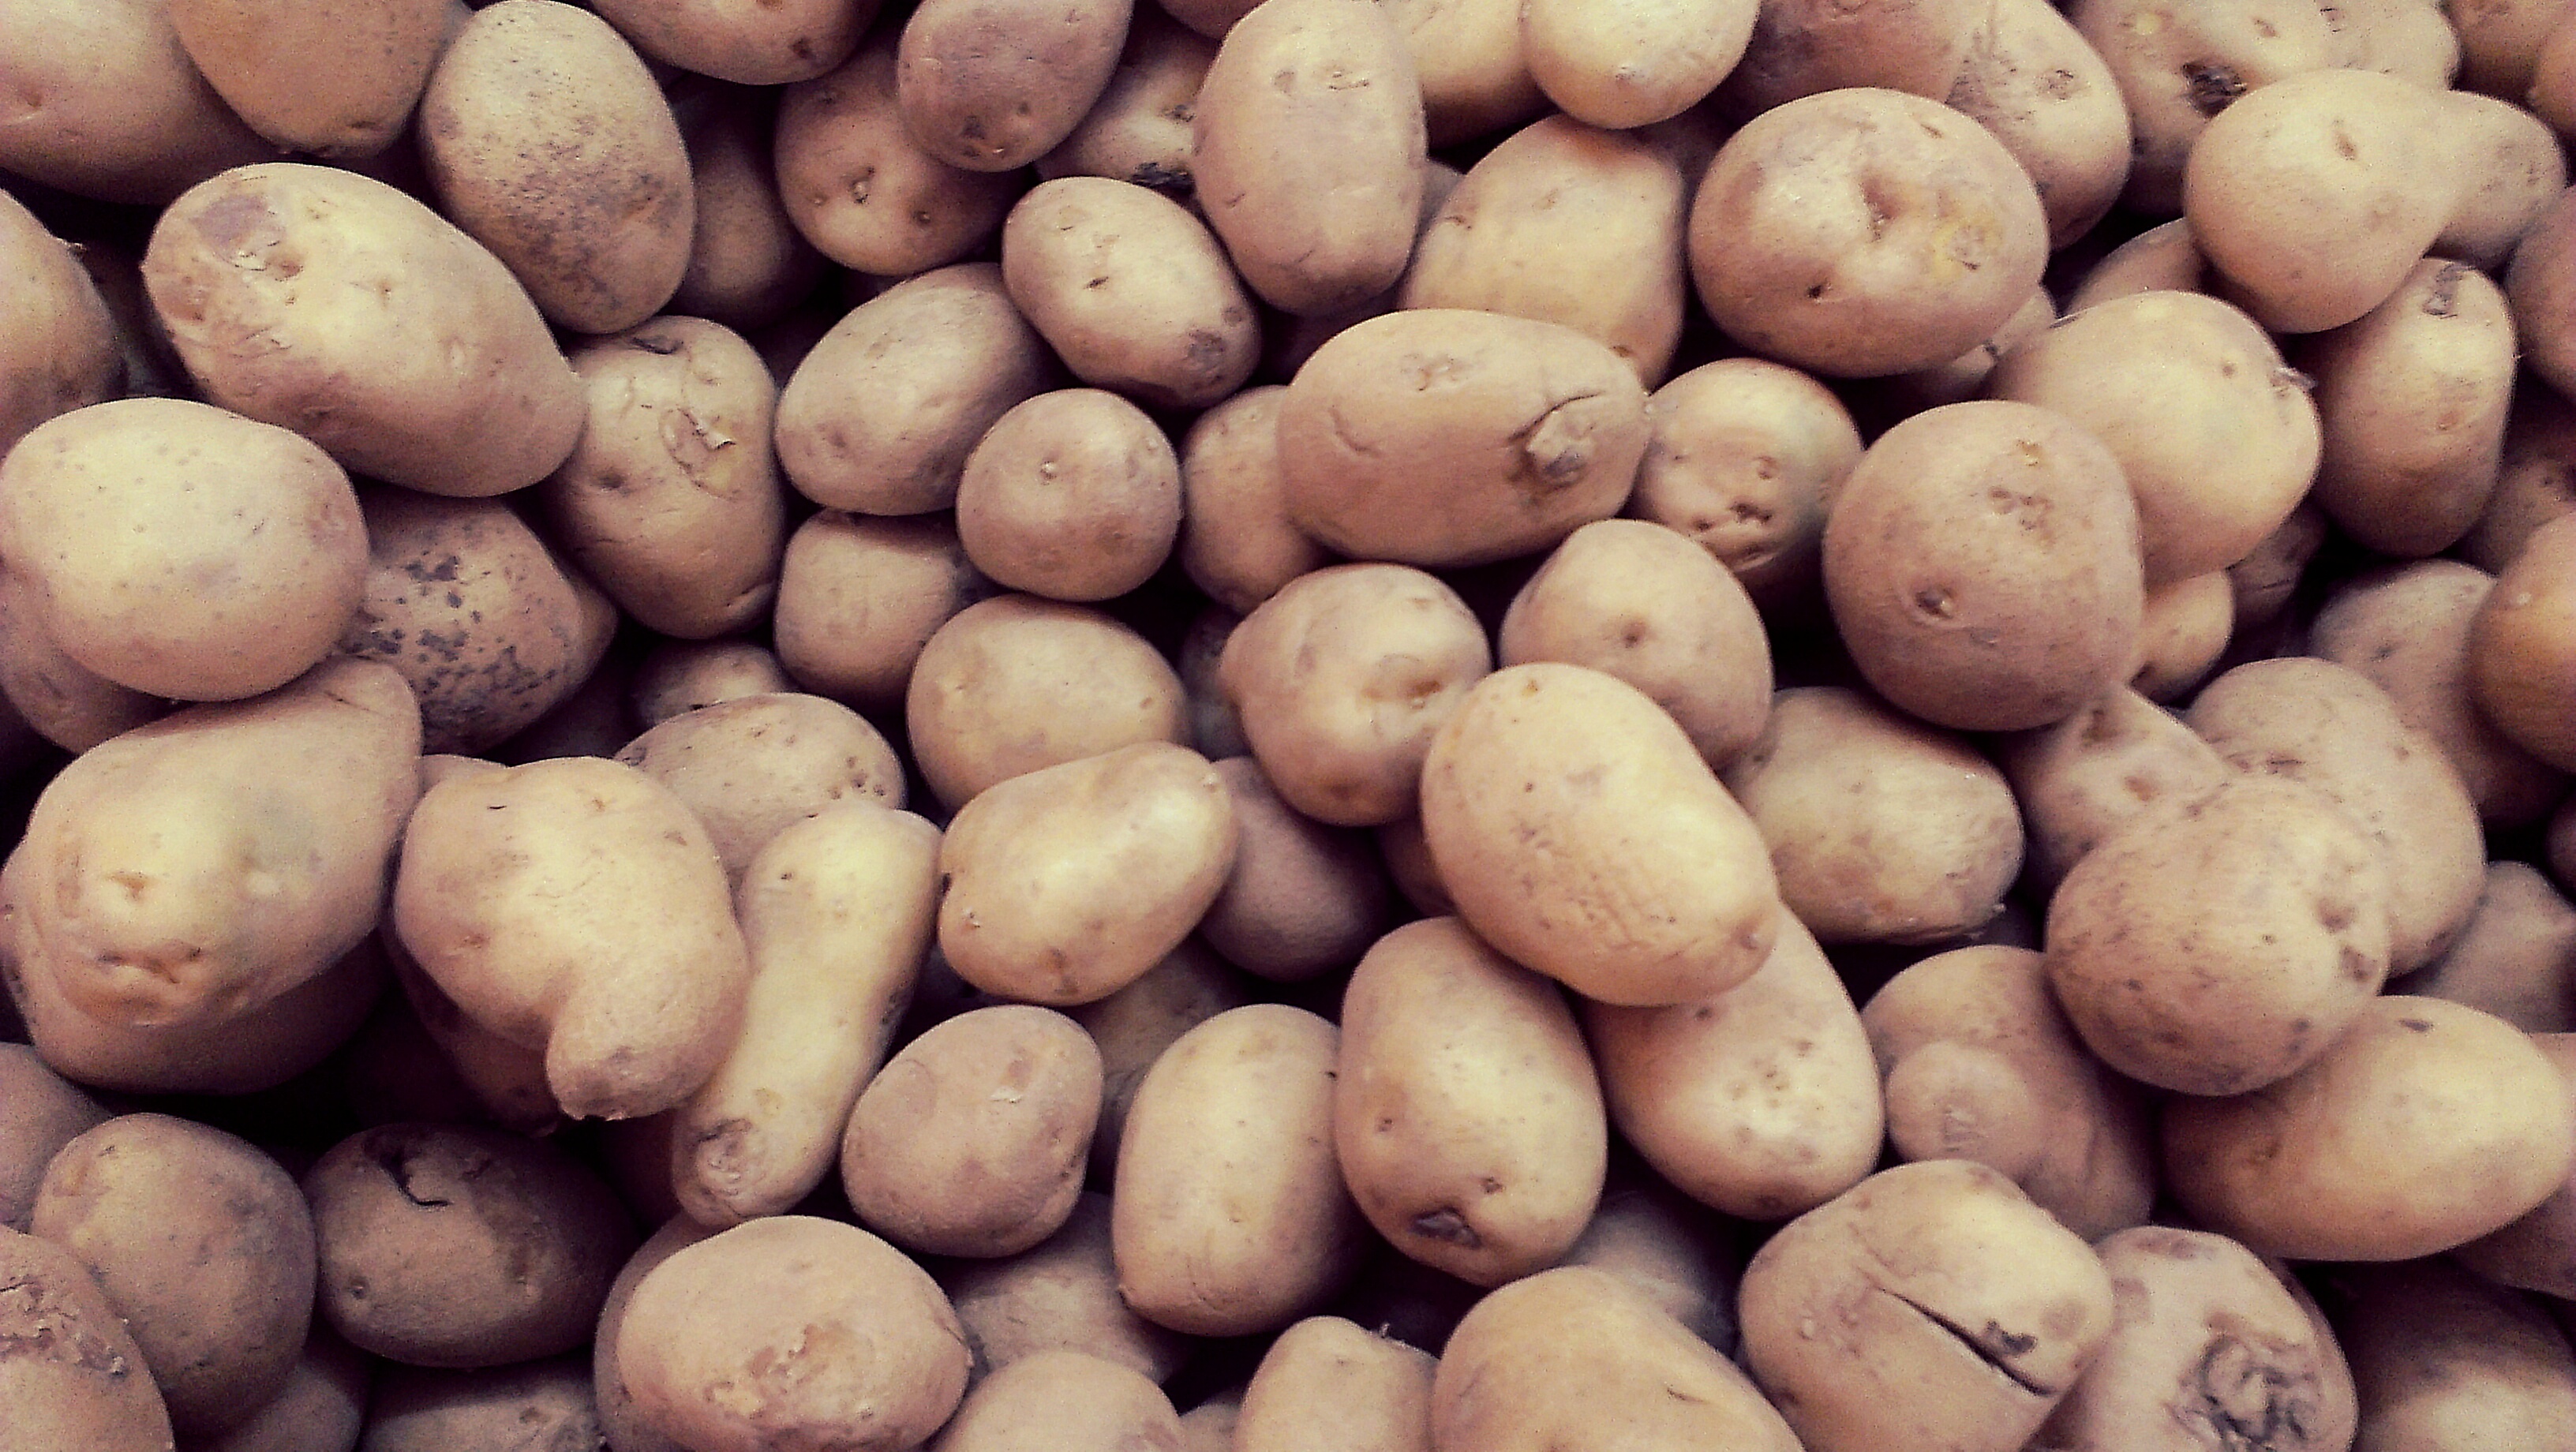 How do potatoes fit into the early diet?